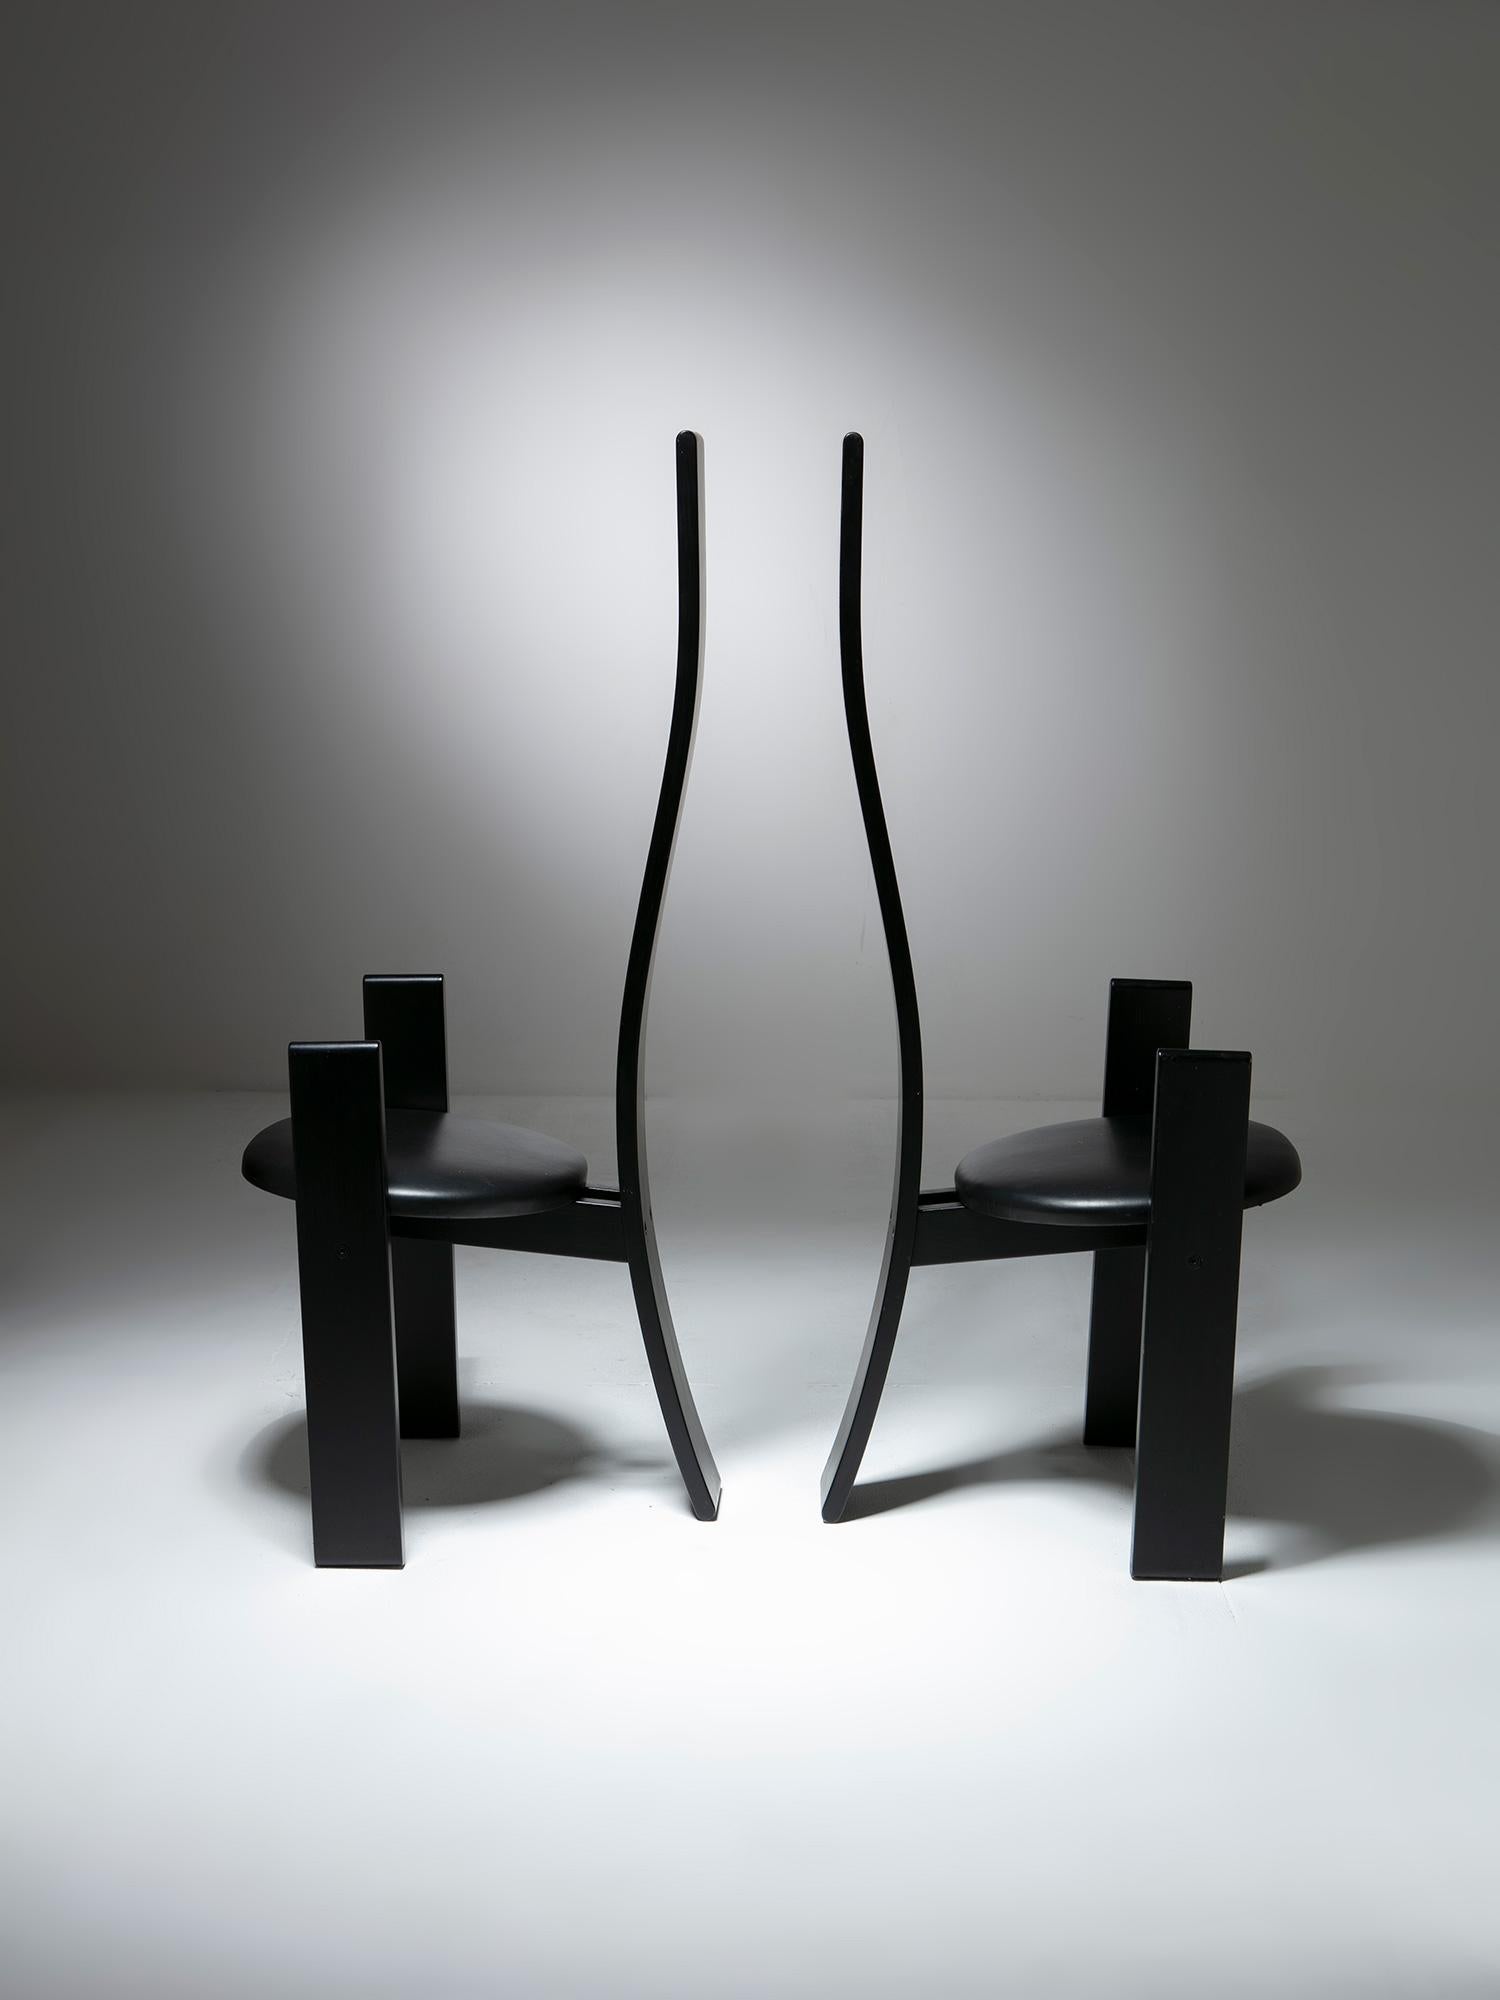 Pair of SD51 Golem chair by Vico Magistretti for Poggi.
Sinuous long backrest, lacquered frame and leather covering.
A third single piece available